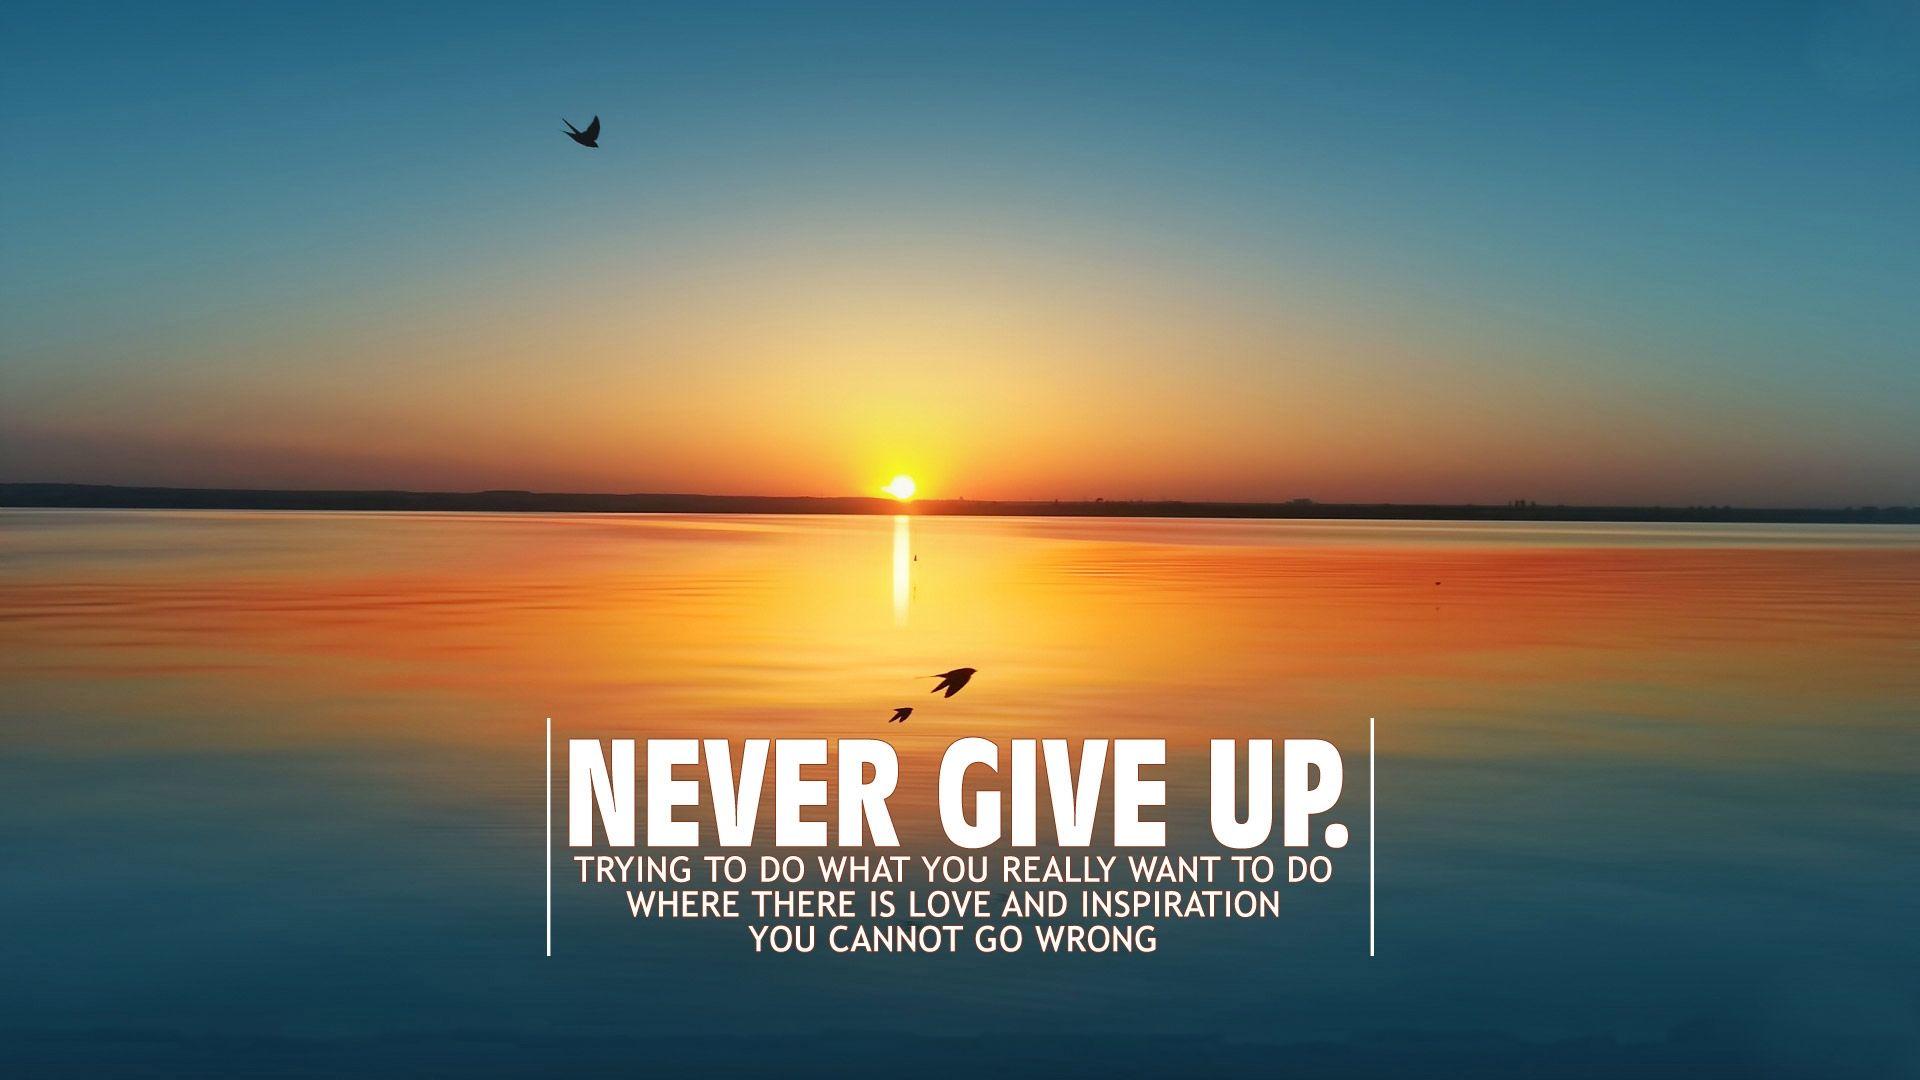 Don't Give Up Wallpaper 18 - [1920x1080]